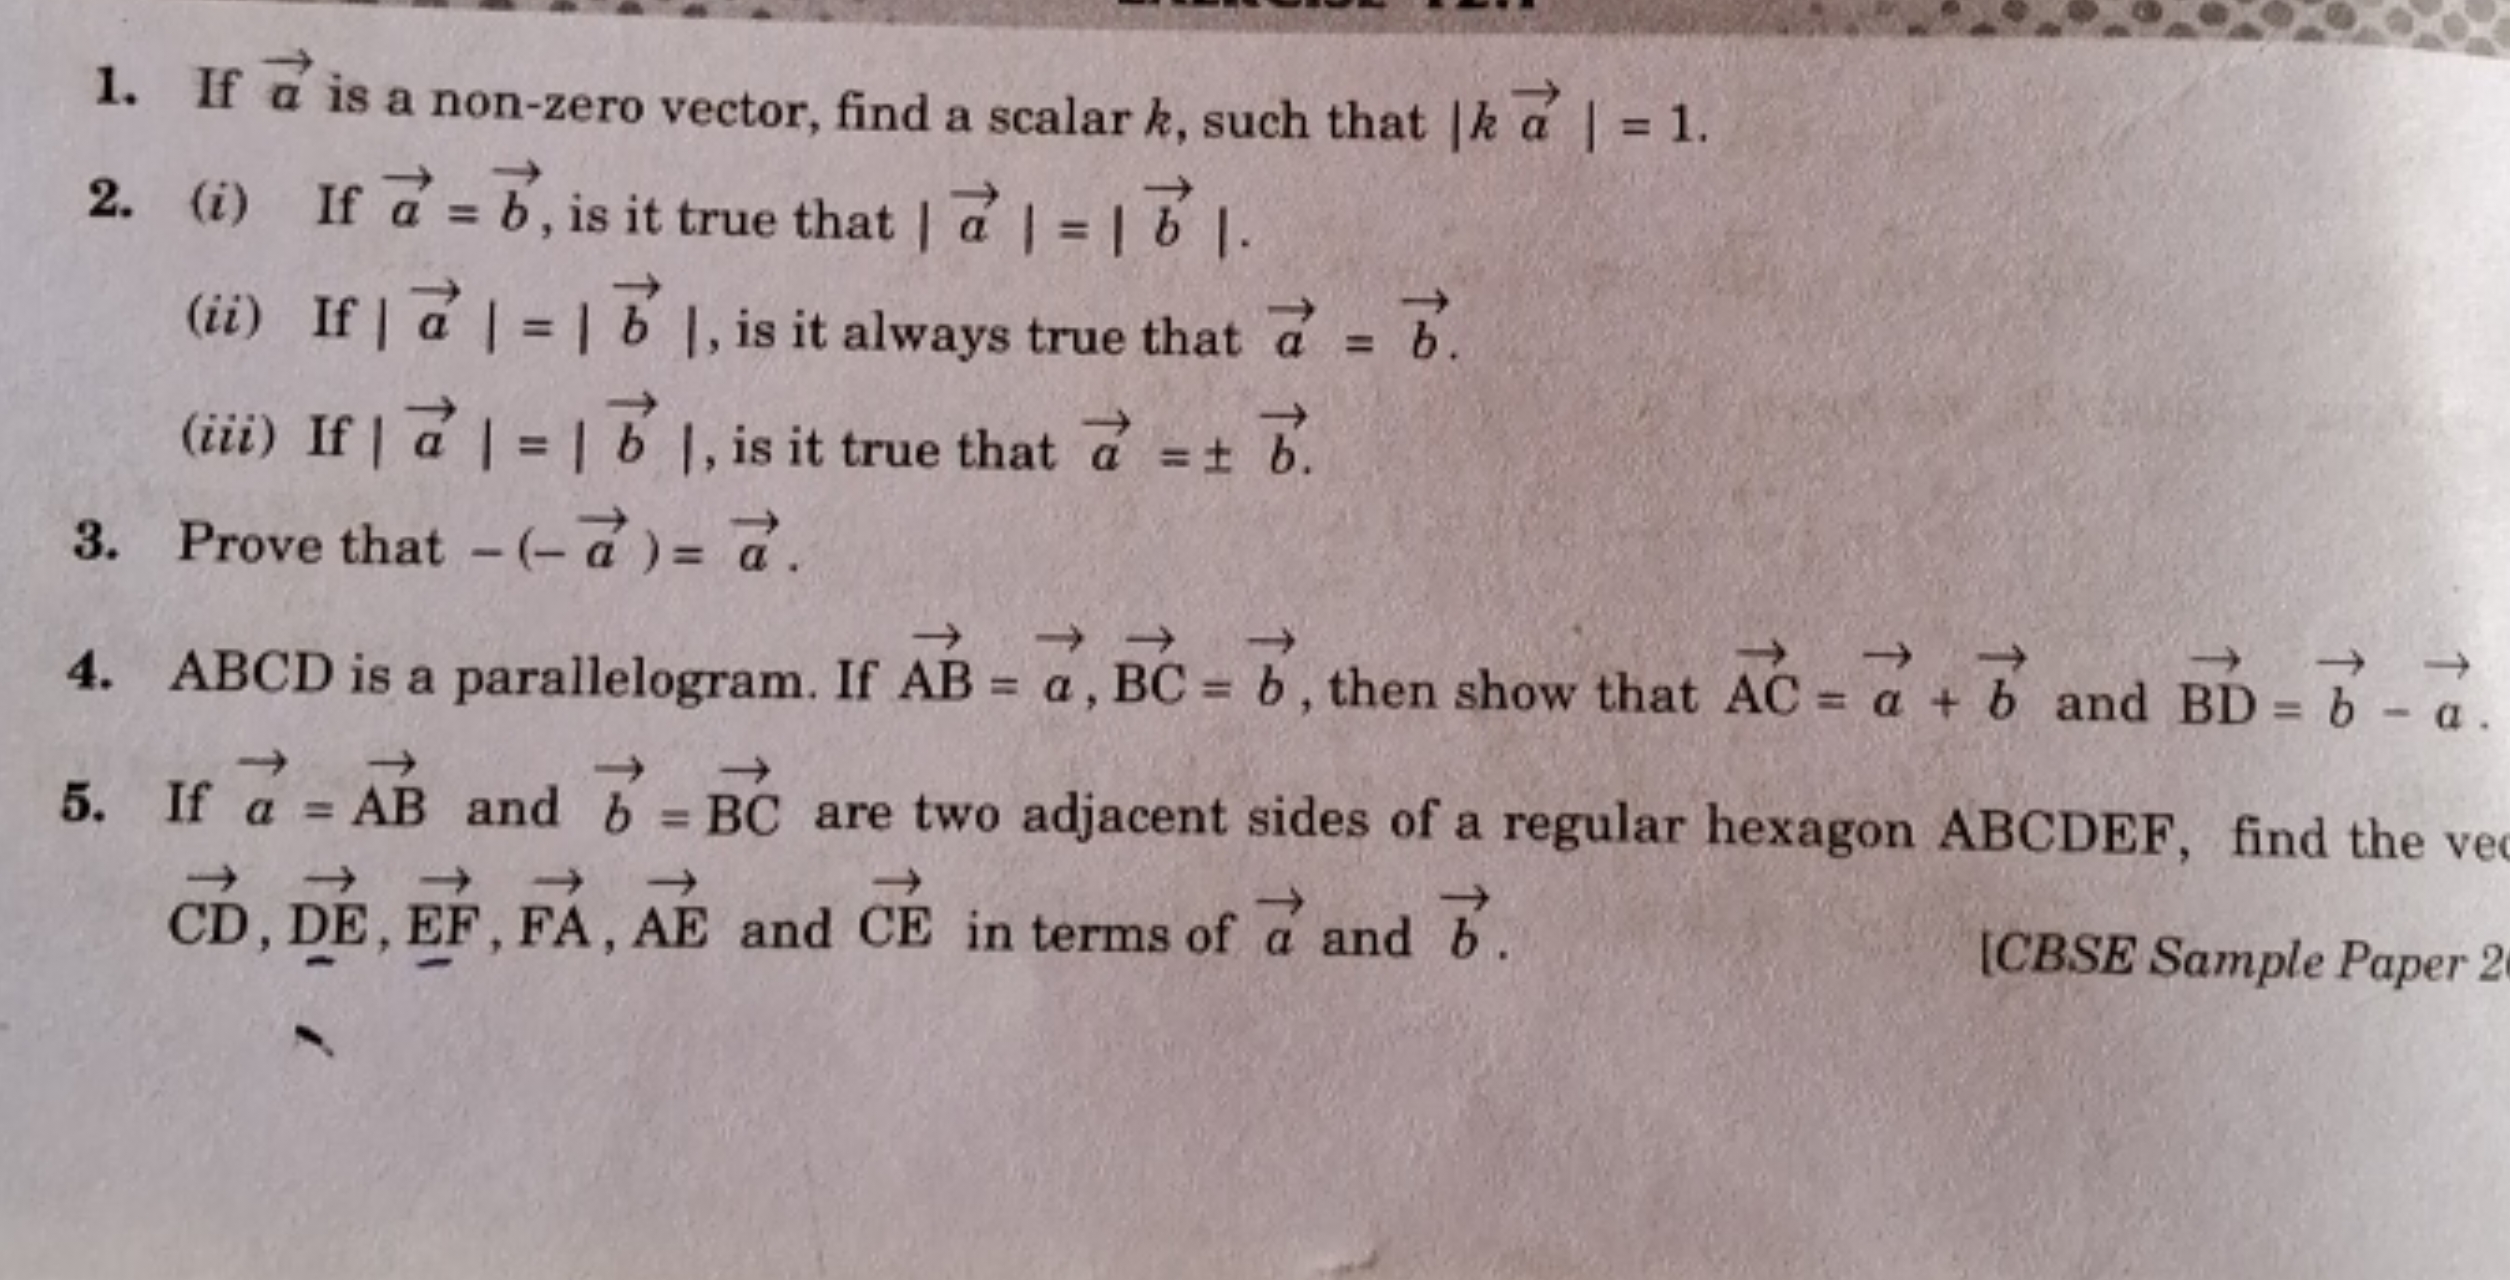 1. If a is a non-zero vector, find a scalar k, such that ∣ka∣=1.
2. (i